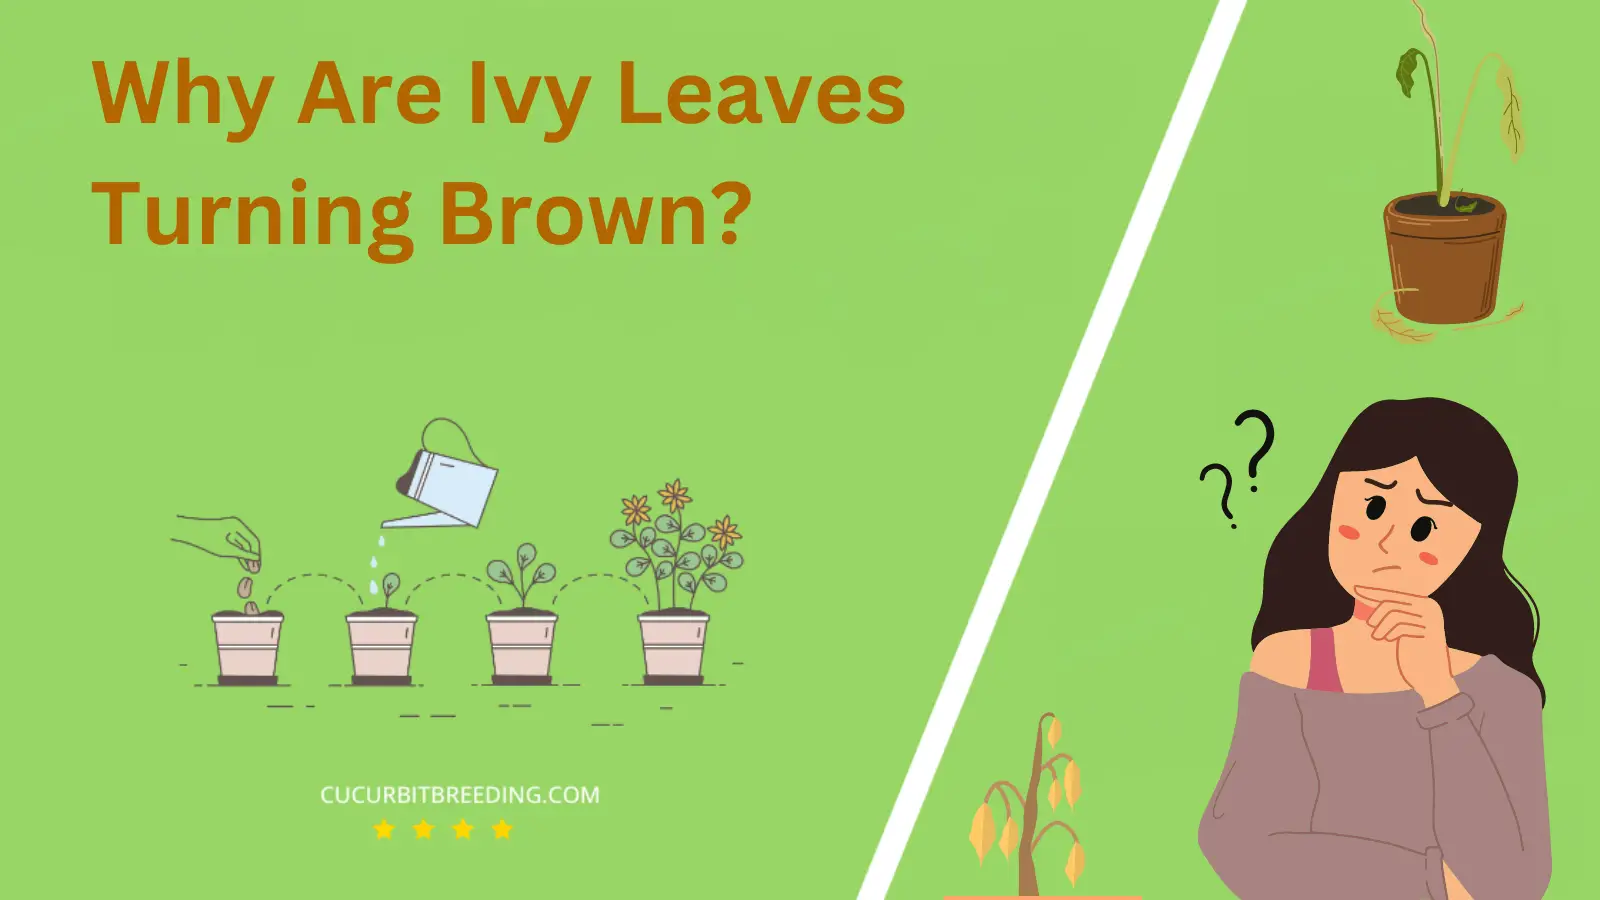 Why Are Ivy Leaves Turning Brown